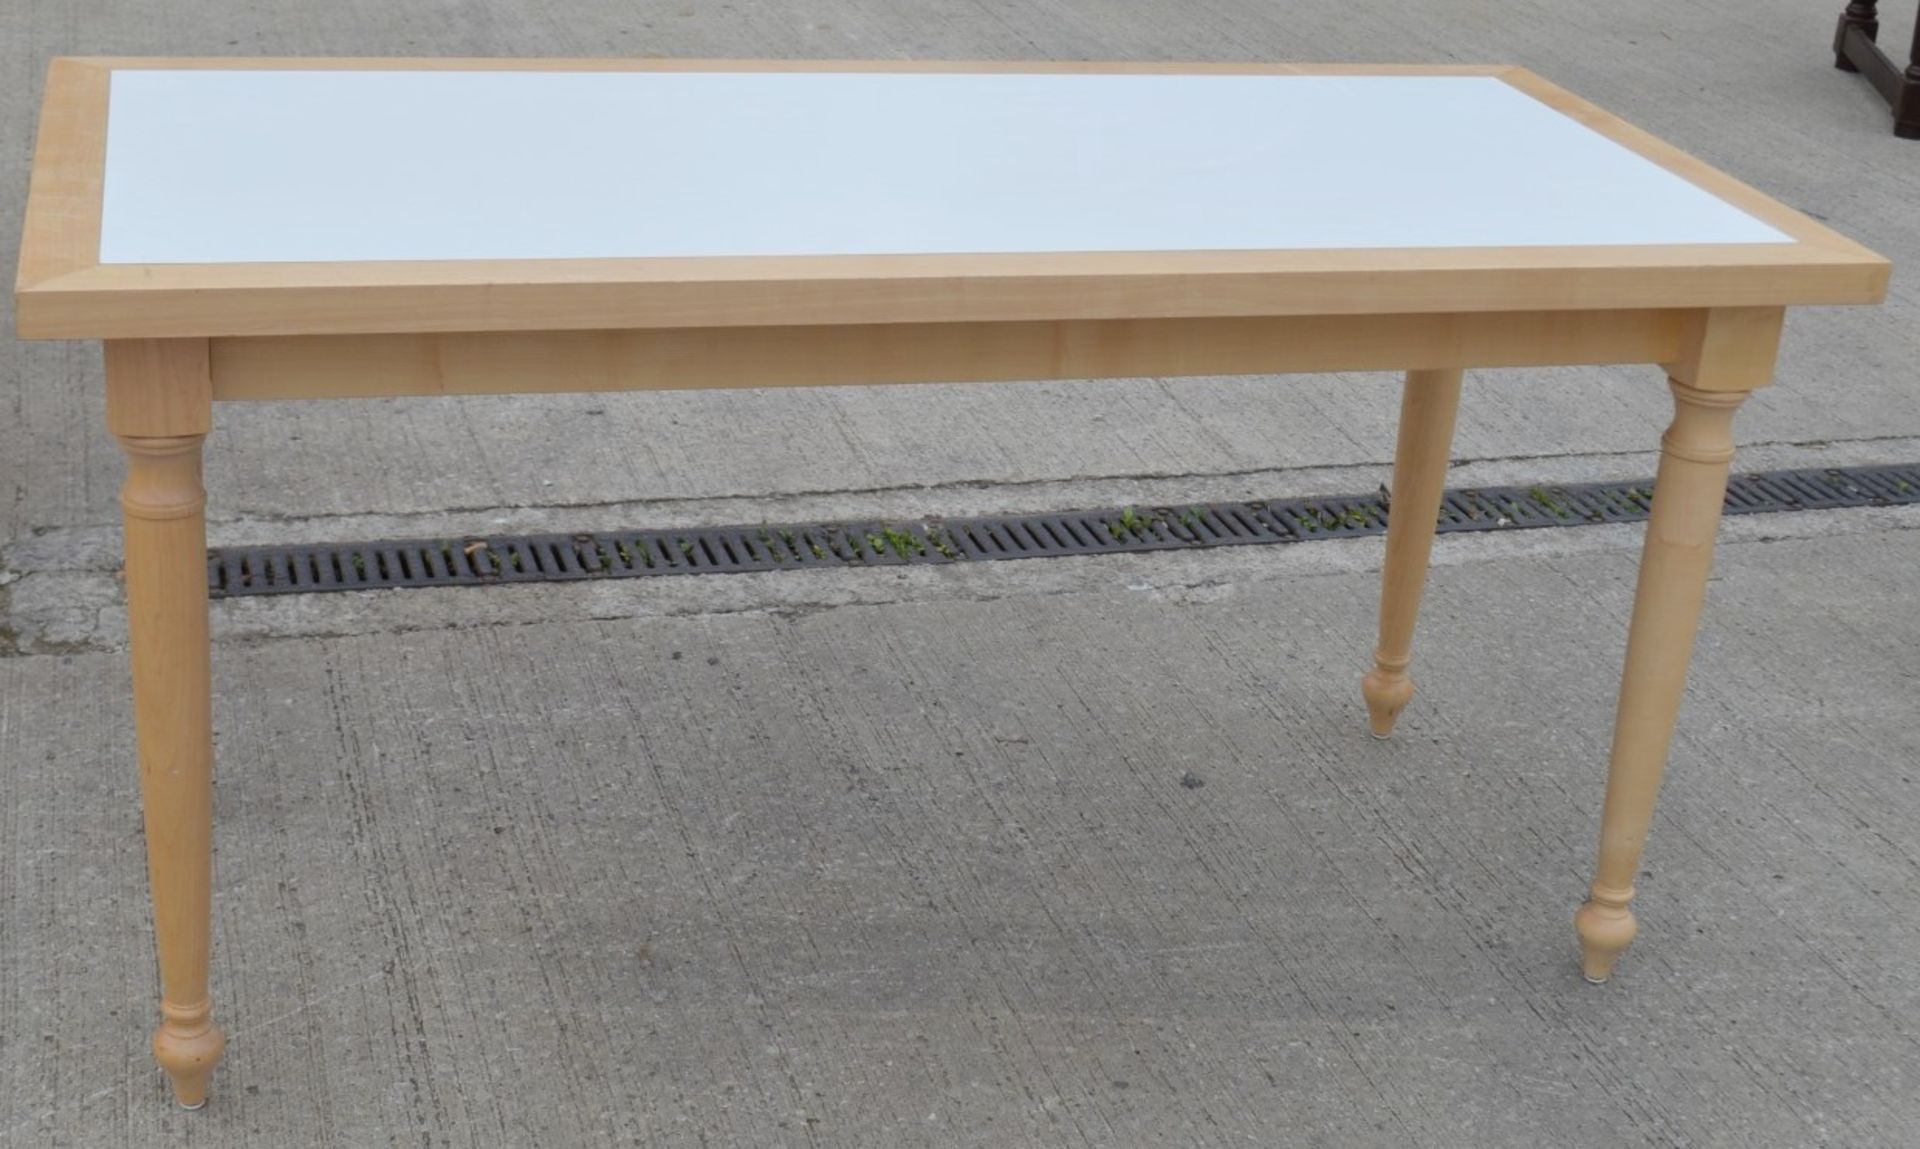 1 x Large Rectangular Event Table In Beech - Features Attractive Turned Legs And A White Inlay - Image 3 of 3